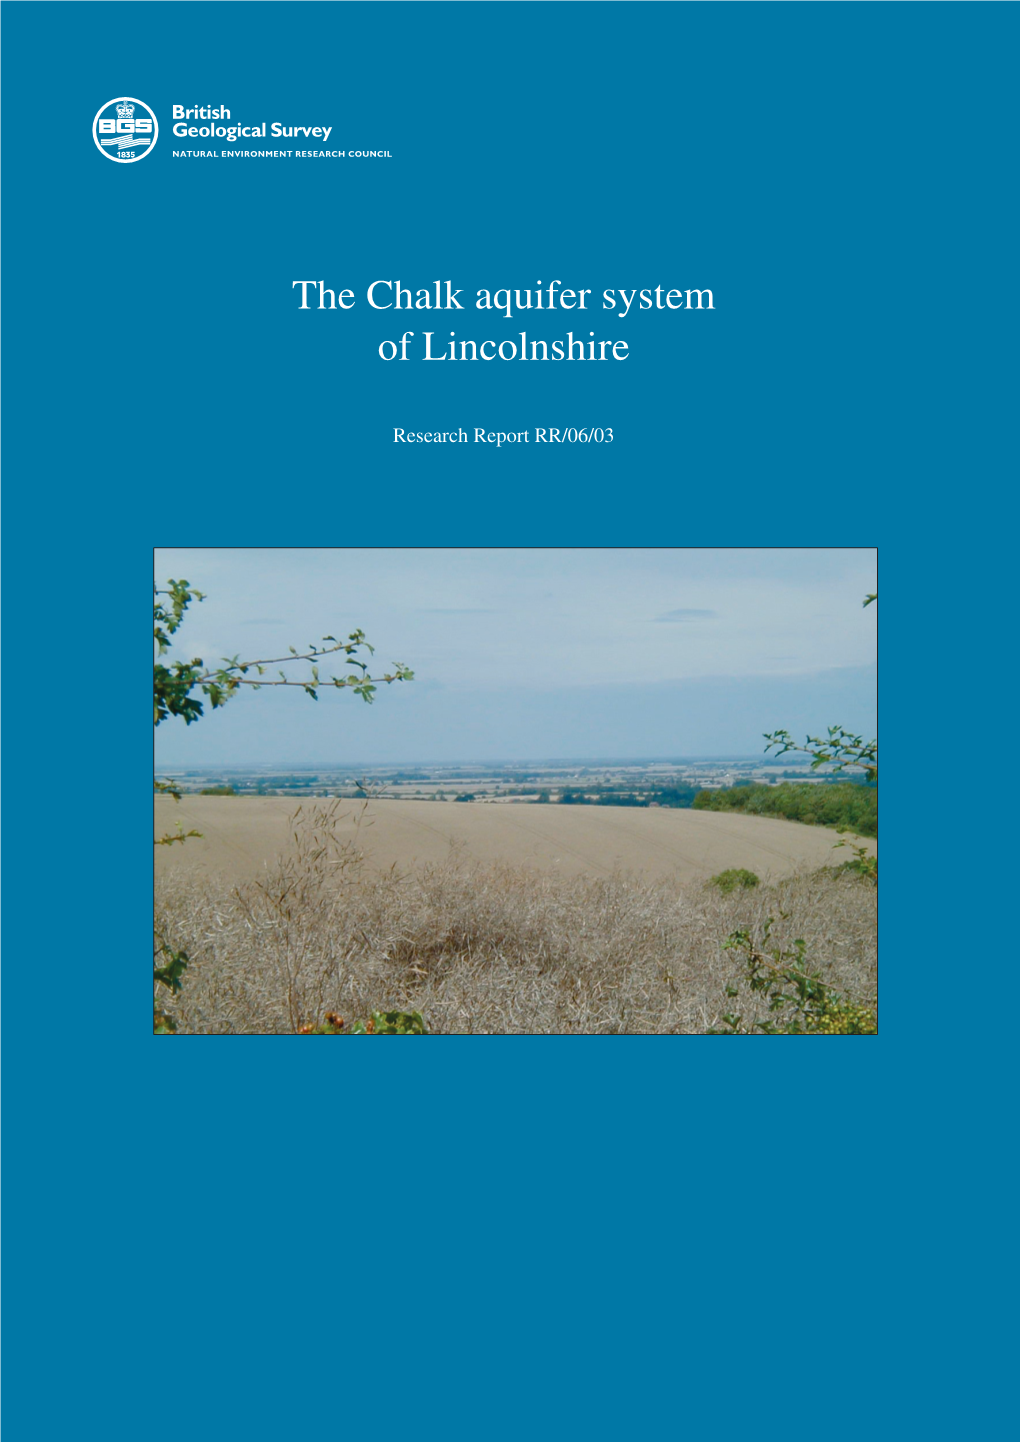 The Chalk Aquifer System of Lincolnshire